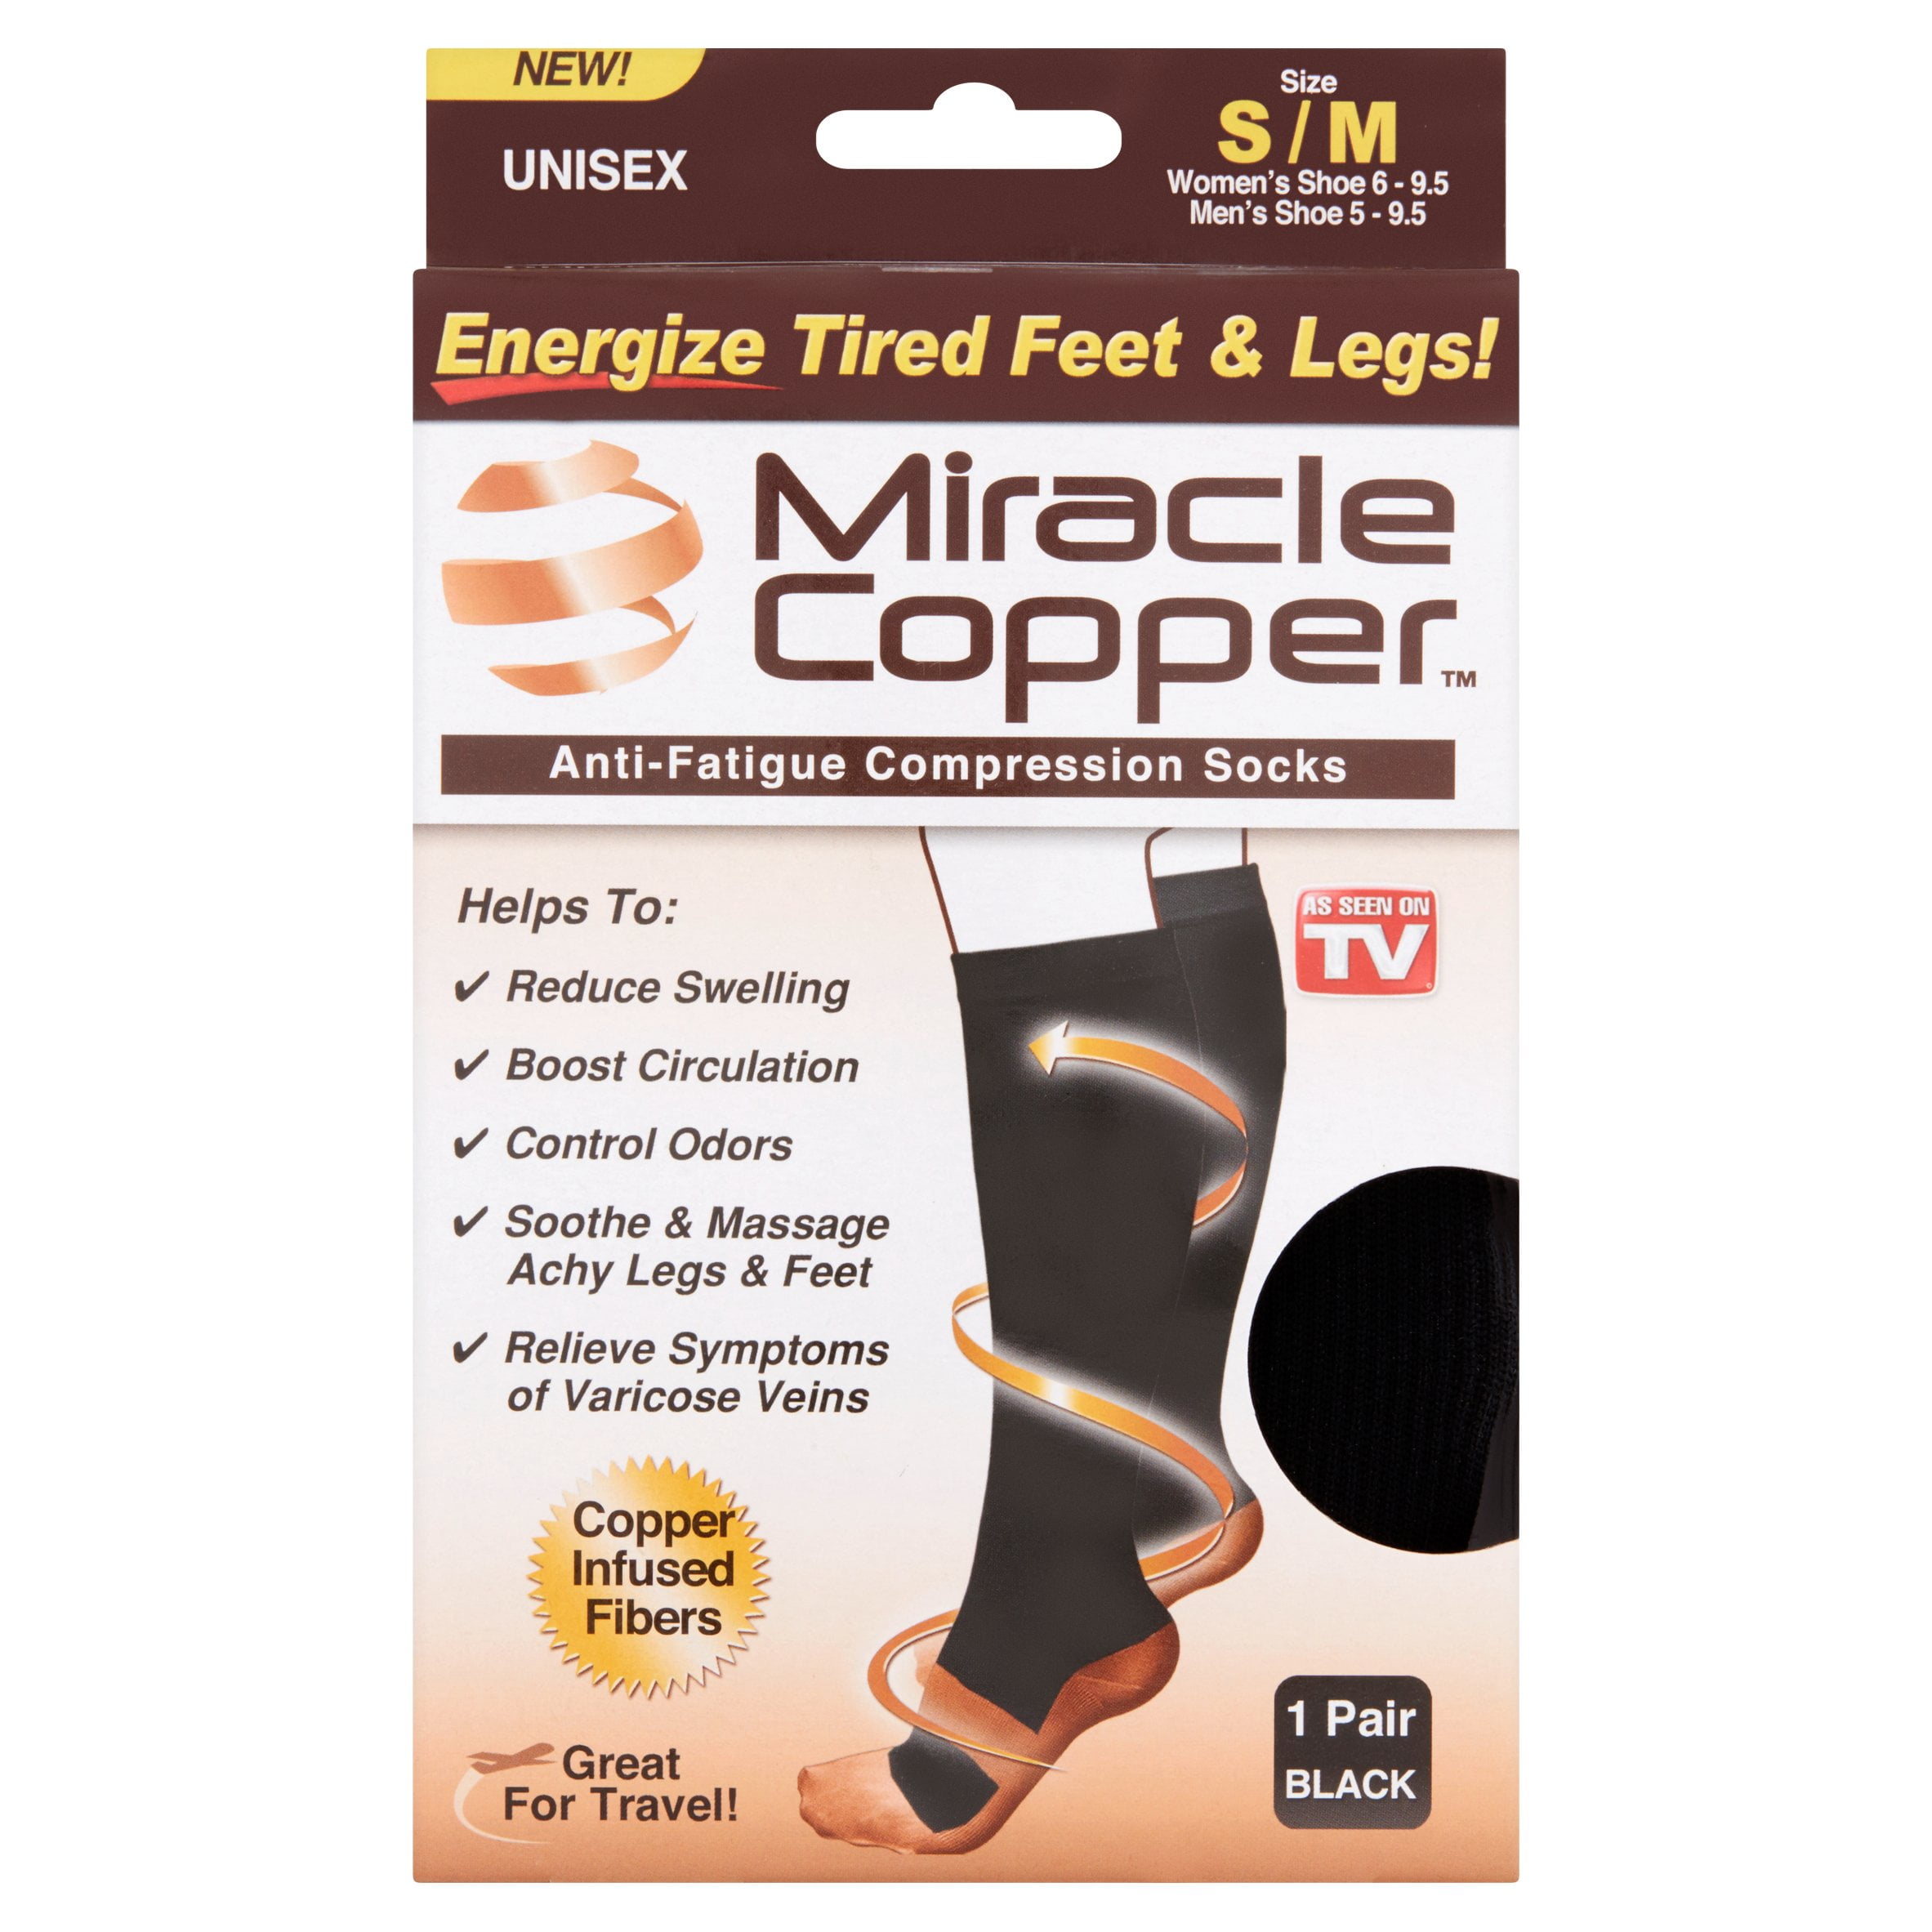 Miracle Socks Relief Compression Achy Feet Varicose Veins DVT Flight Travel 